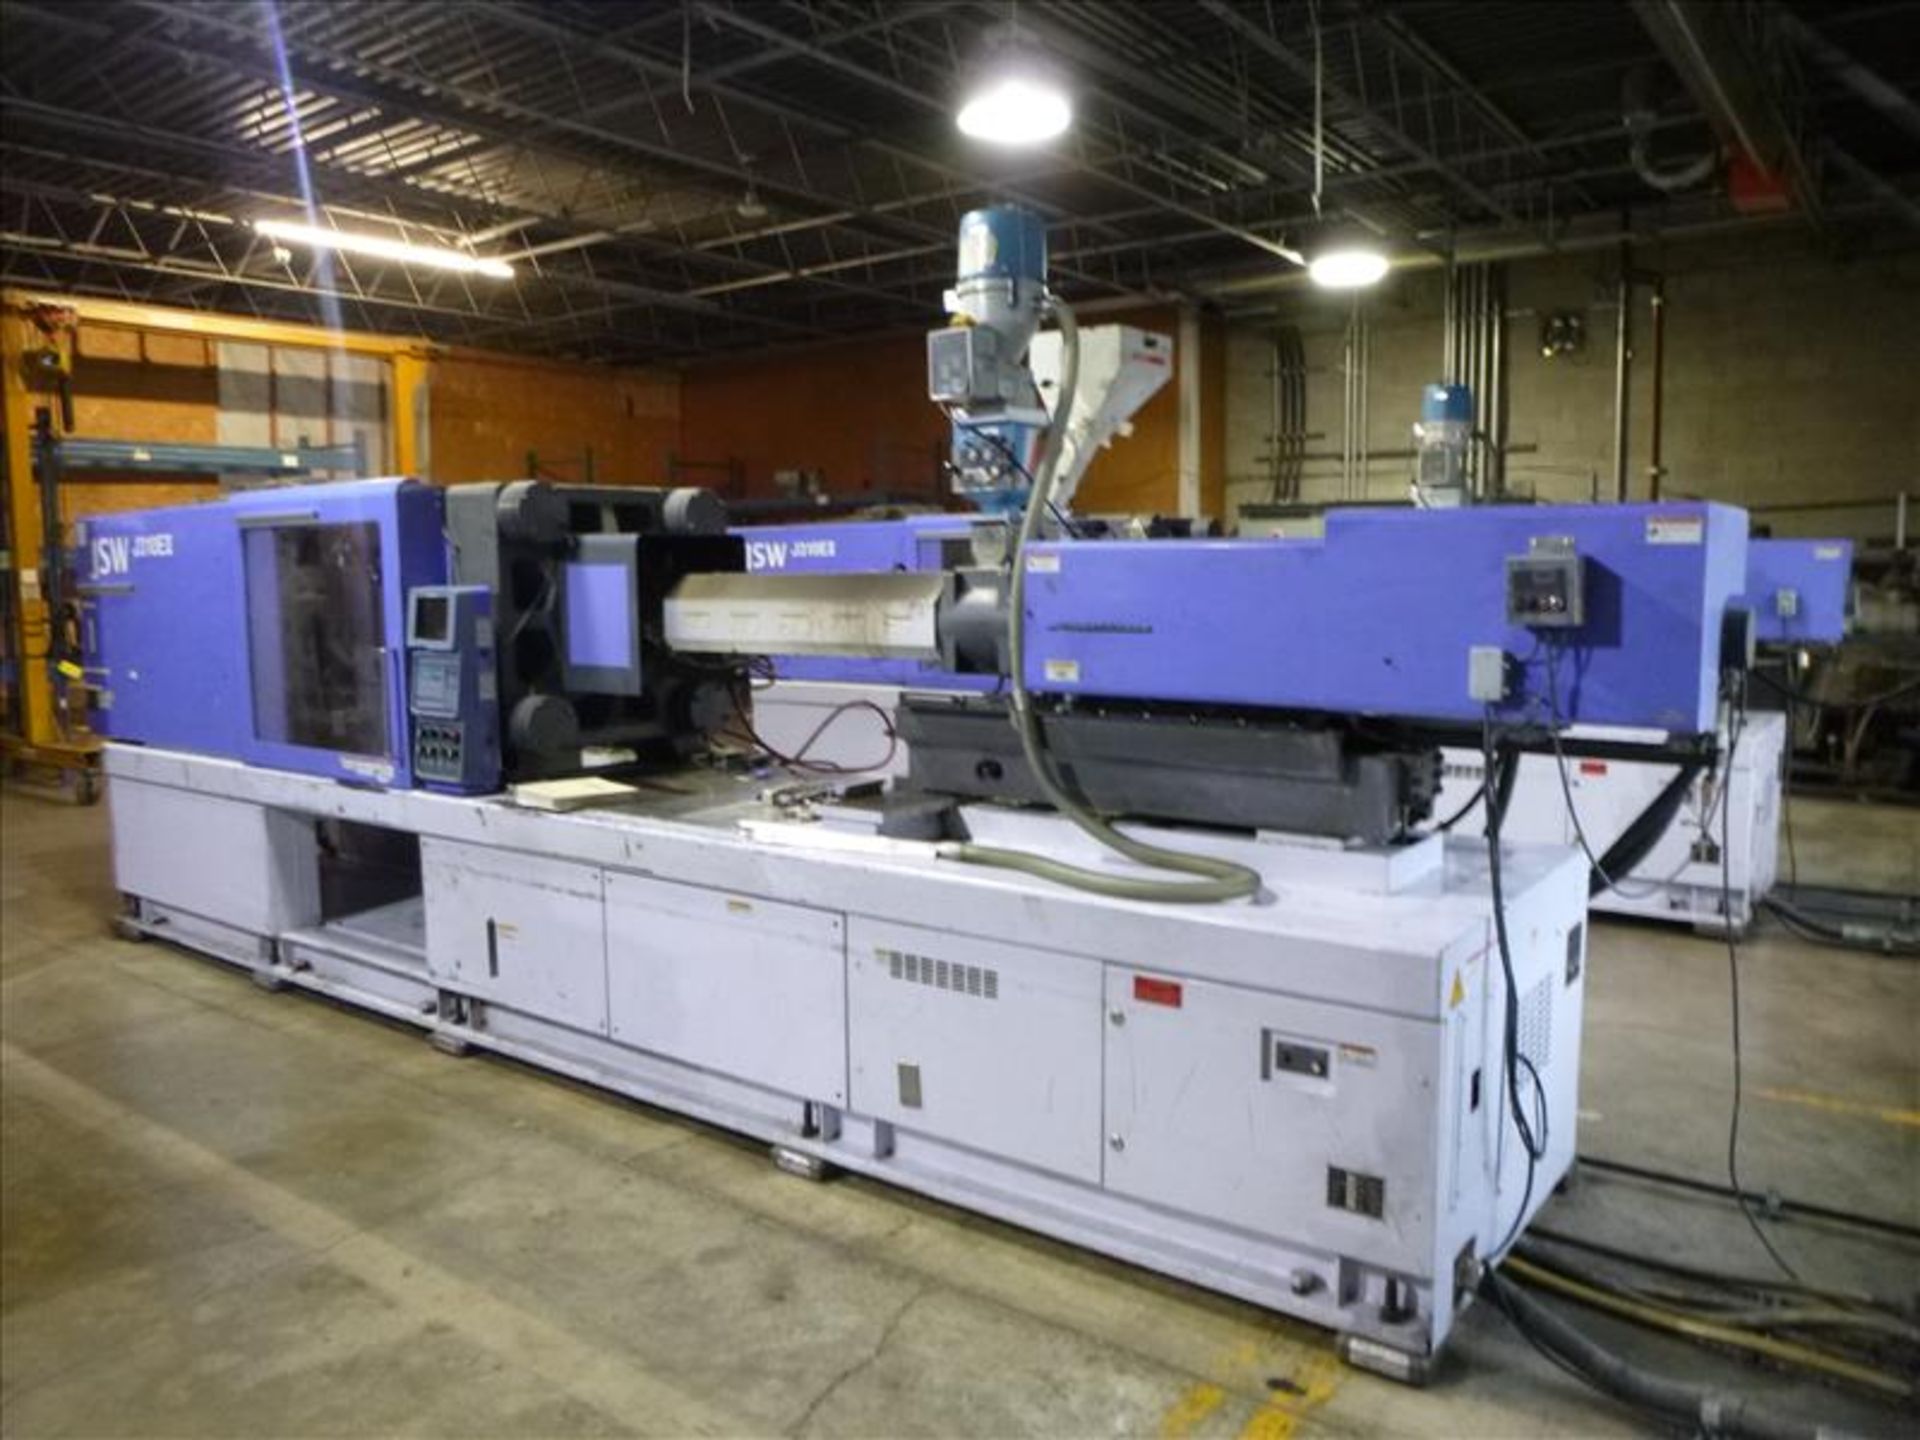 JSW mod. J310EII 310 Ton Injection Moulding Machine ser. no. 297714606 (1999) w/22.44 in. Clamp - Image 2 of 8